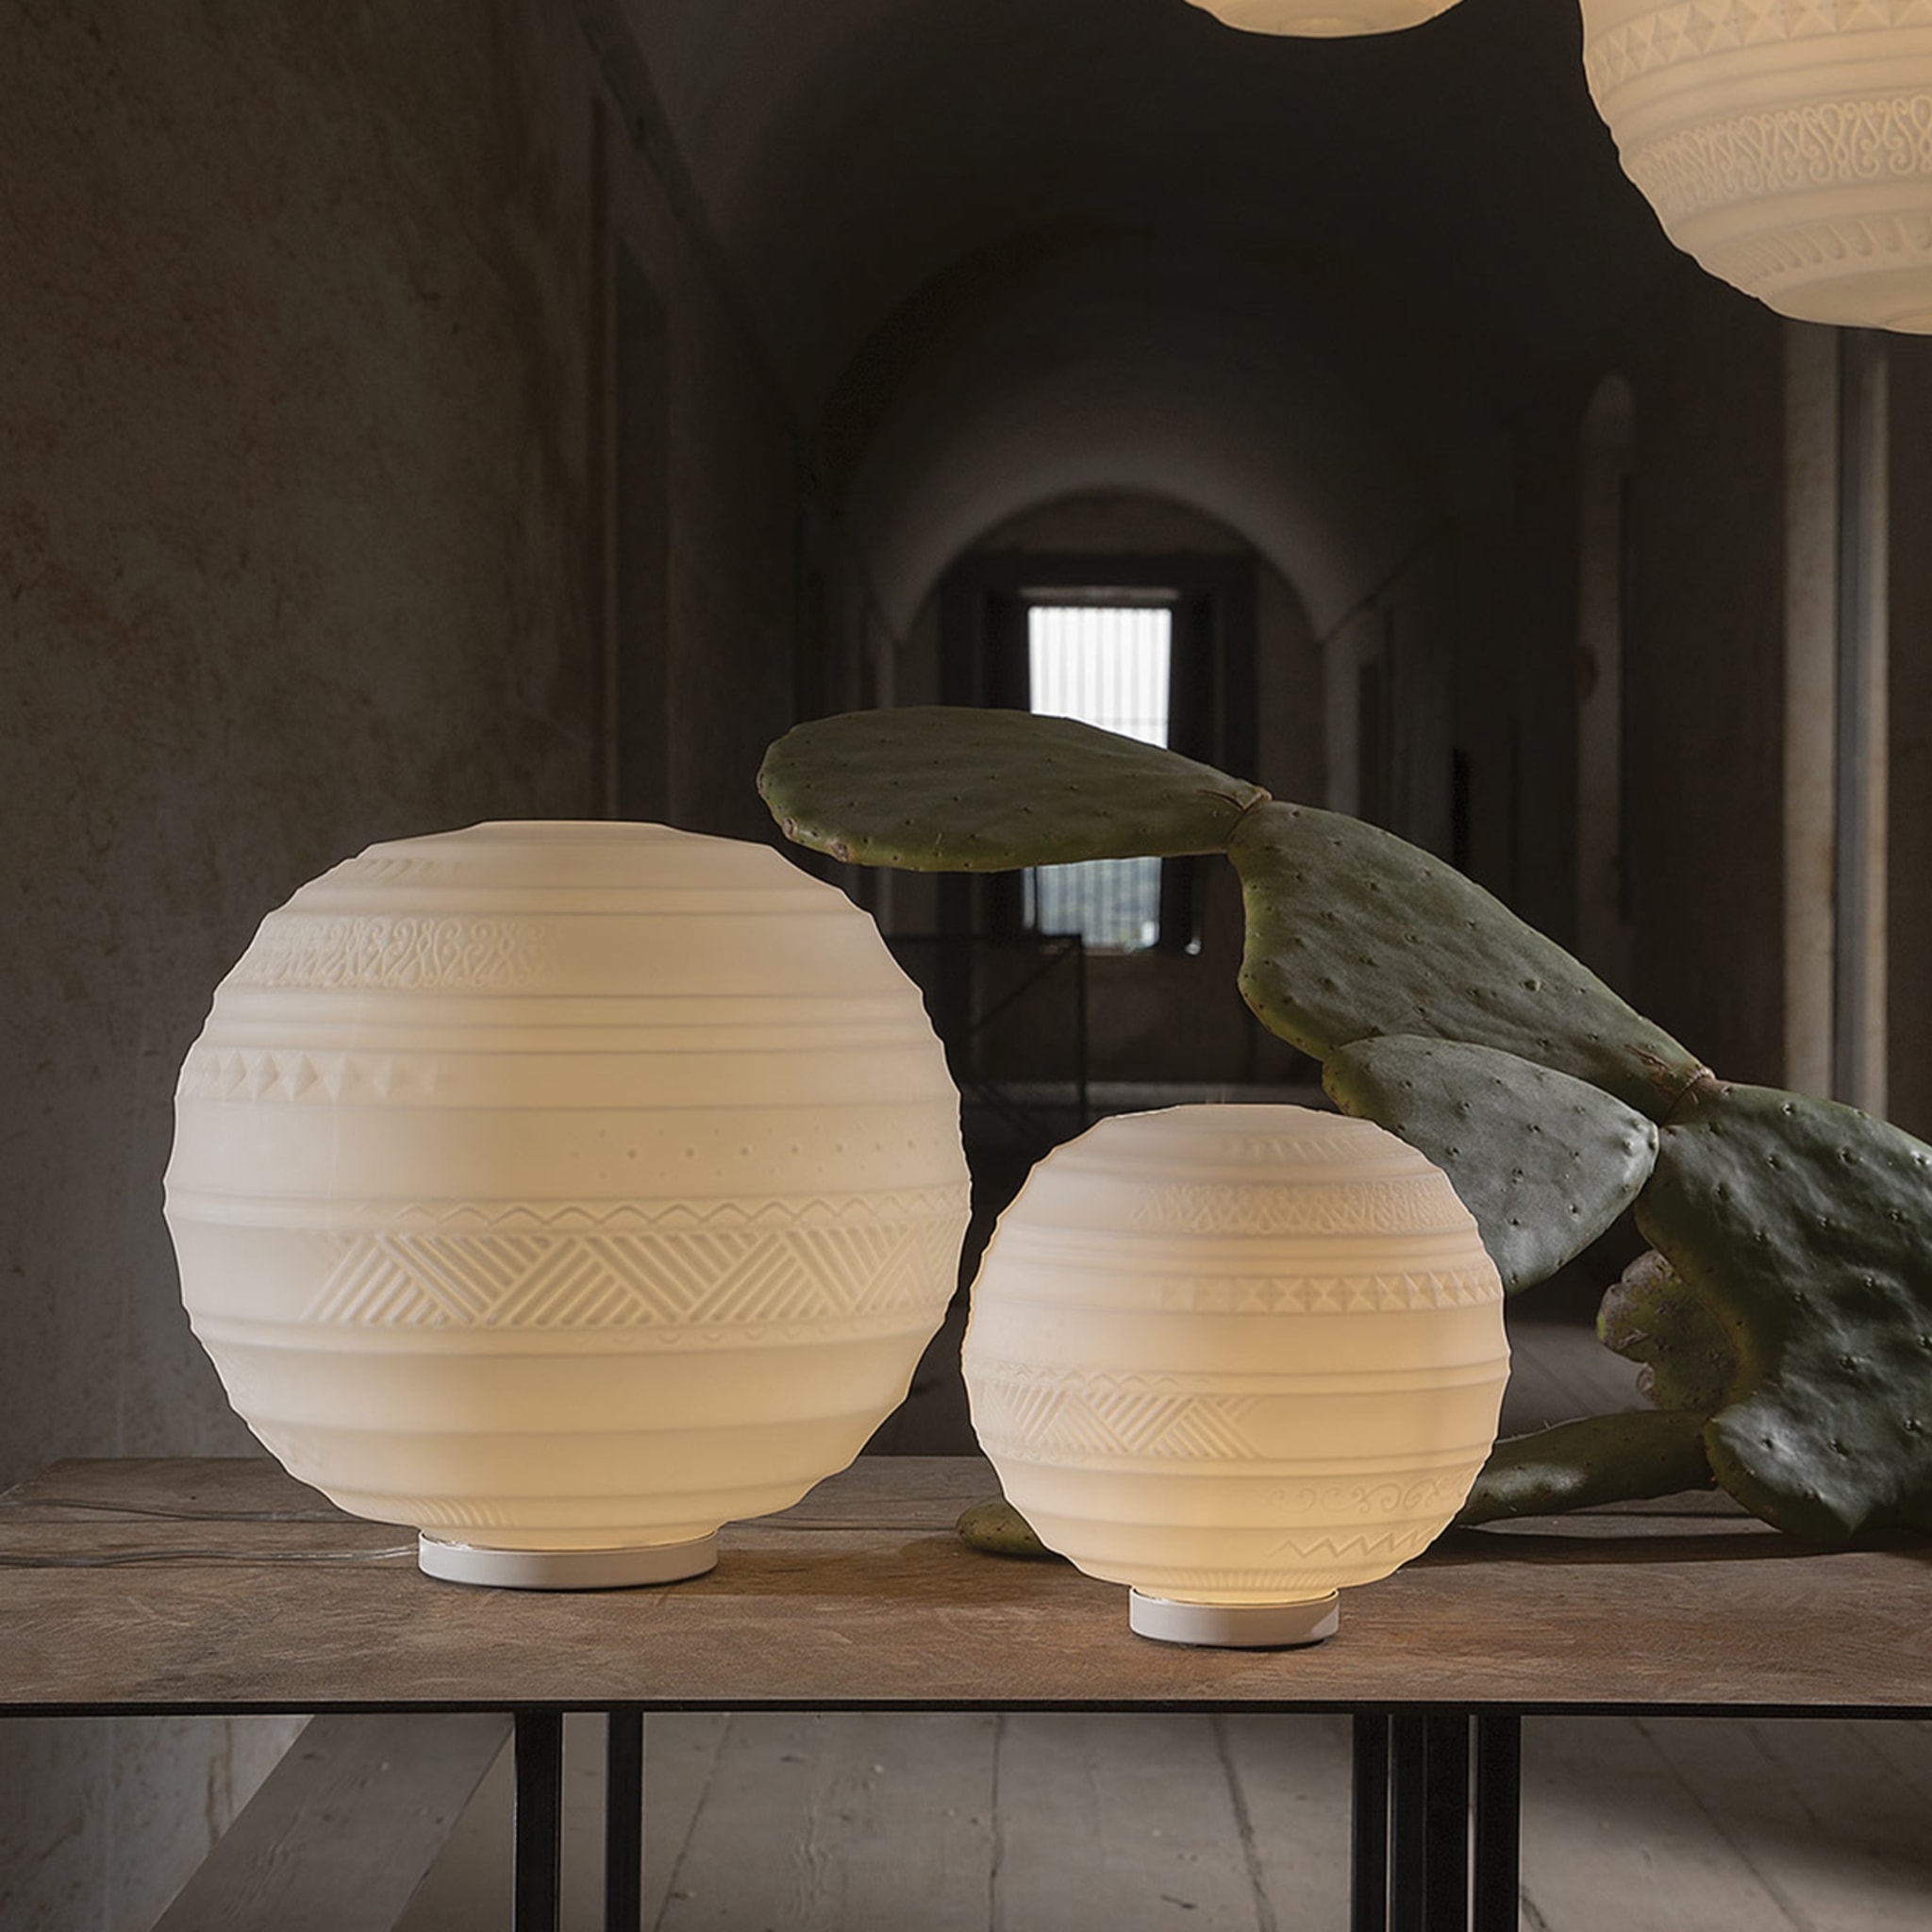 Braille Table Lamp by Matteo Ugolini - Alternative view 1